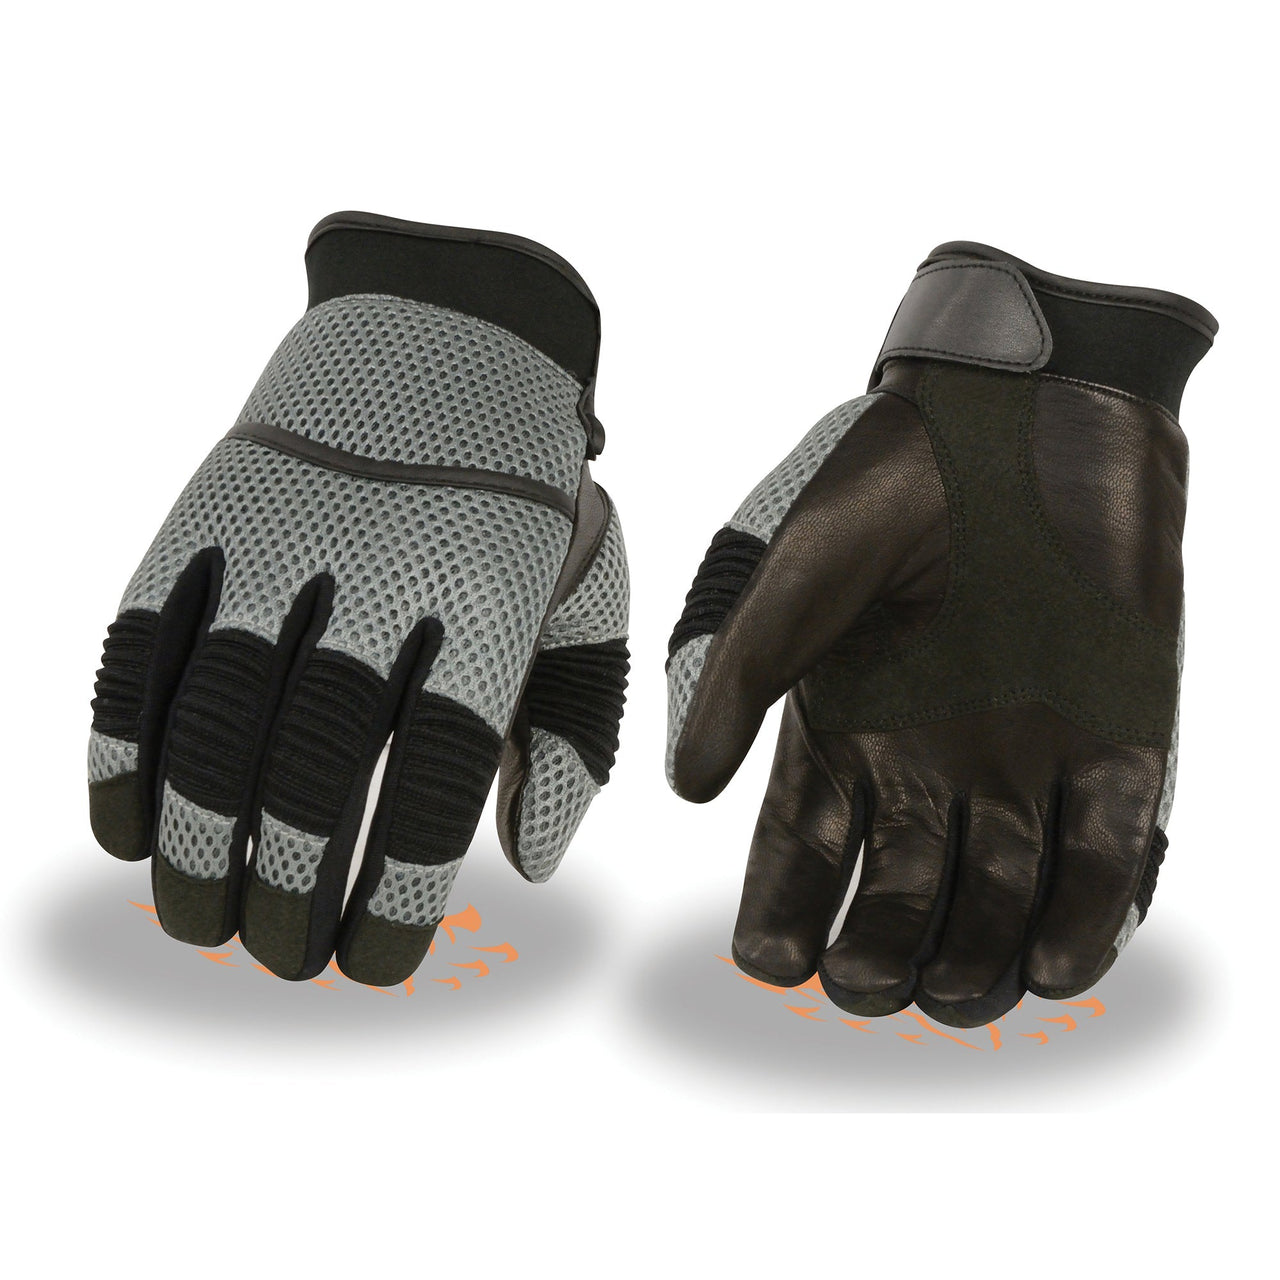 Men's Mesh Racing Gloves w/ Leather Palm - HighwayLeather